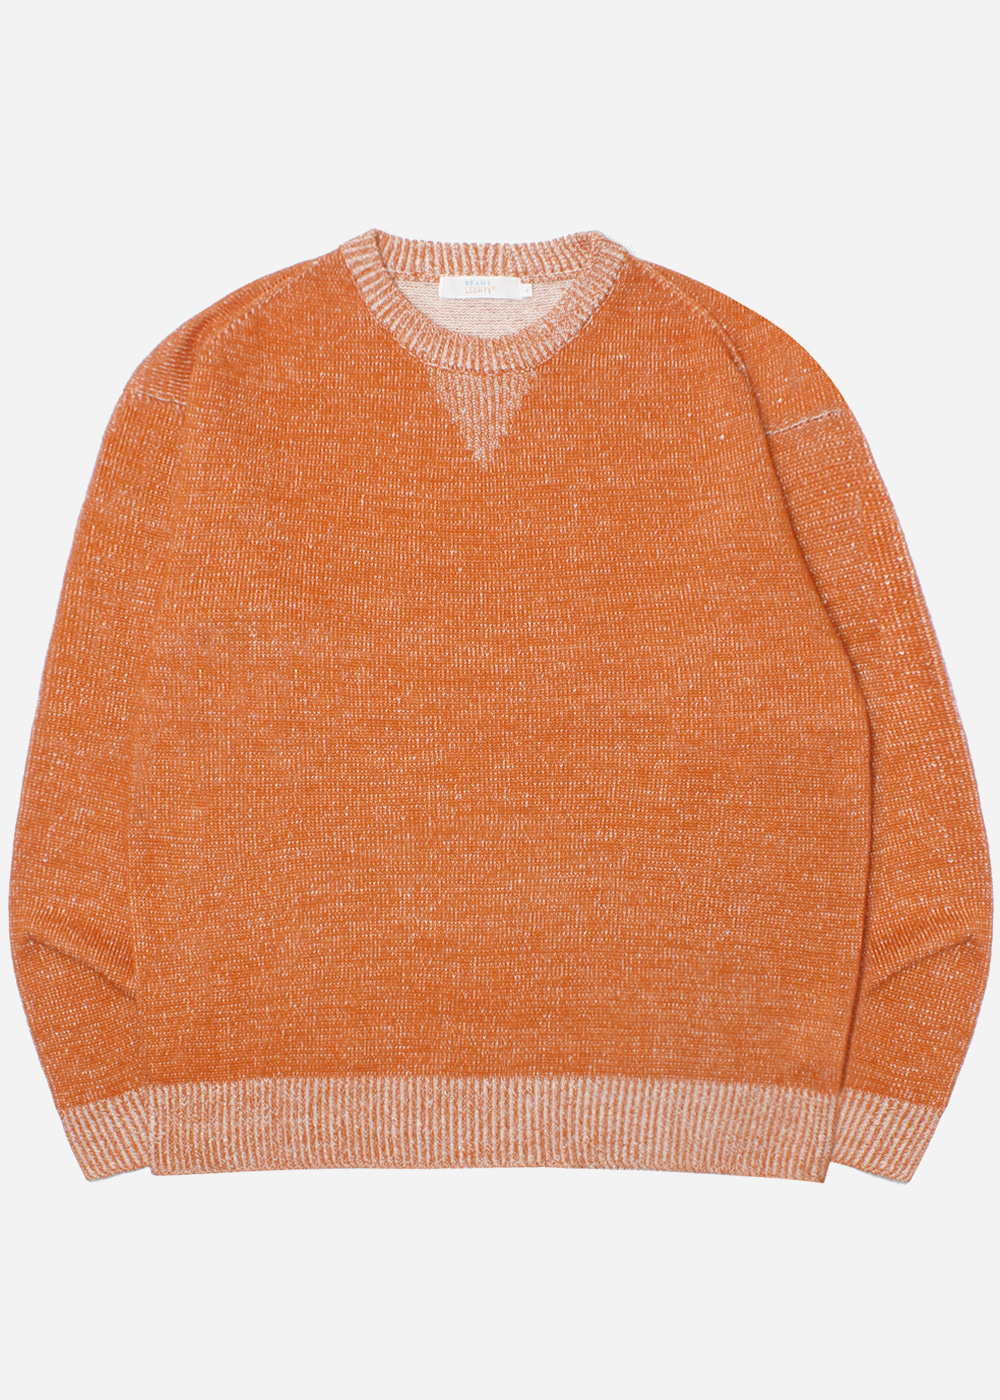 BEAMS’over fit’ wool knit sweater